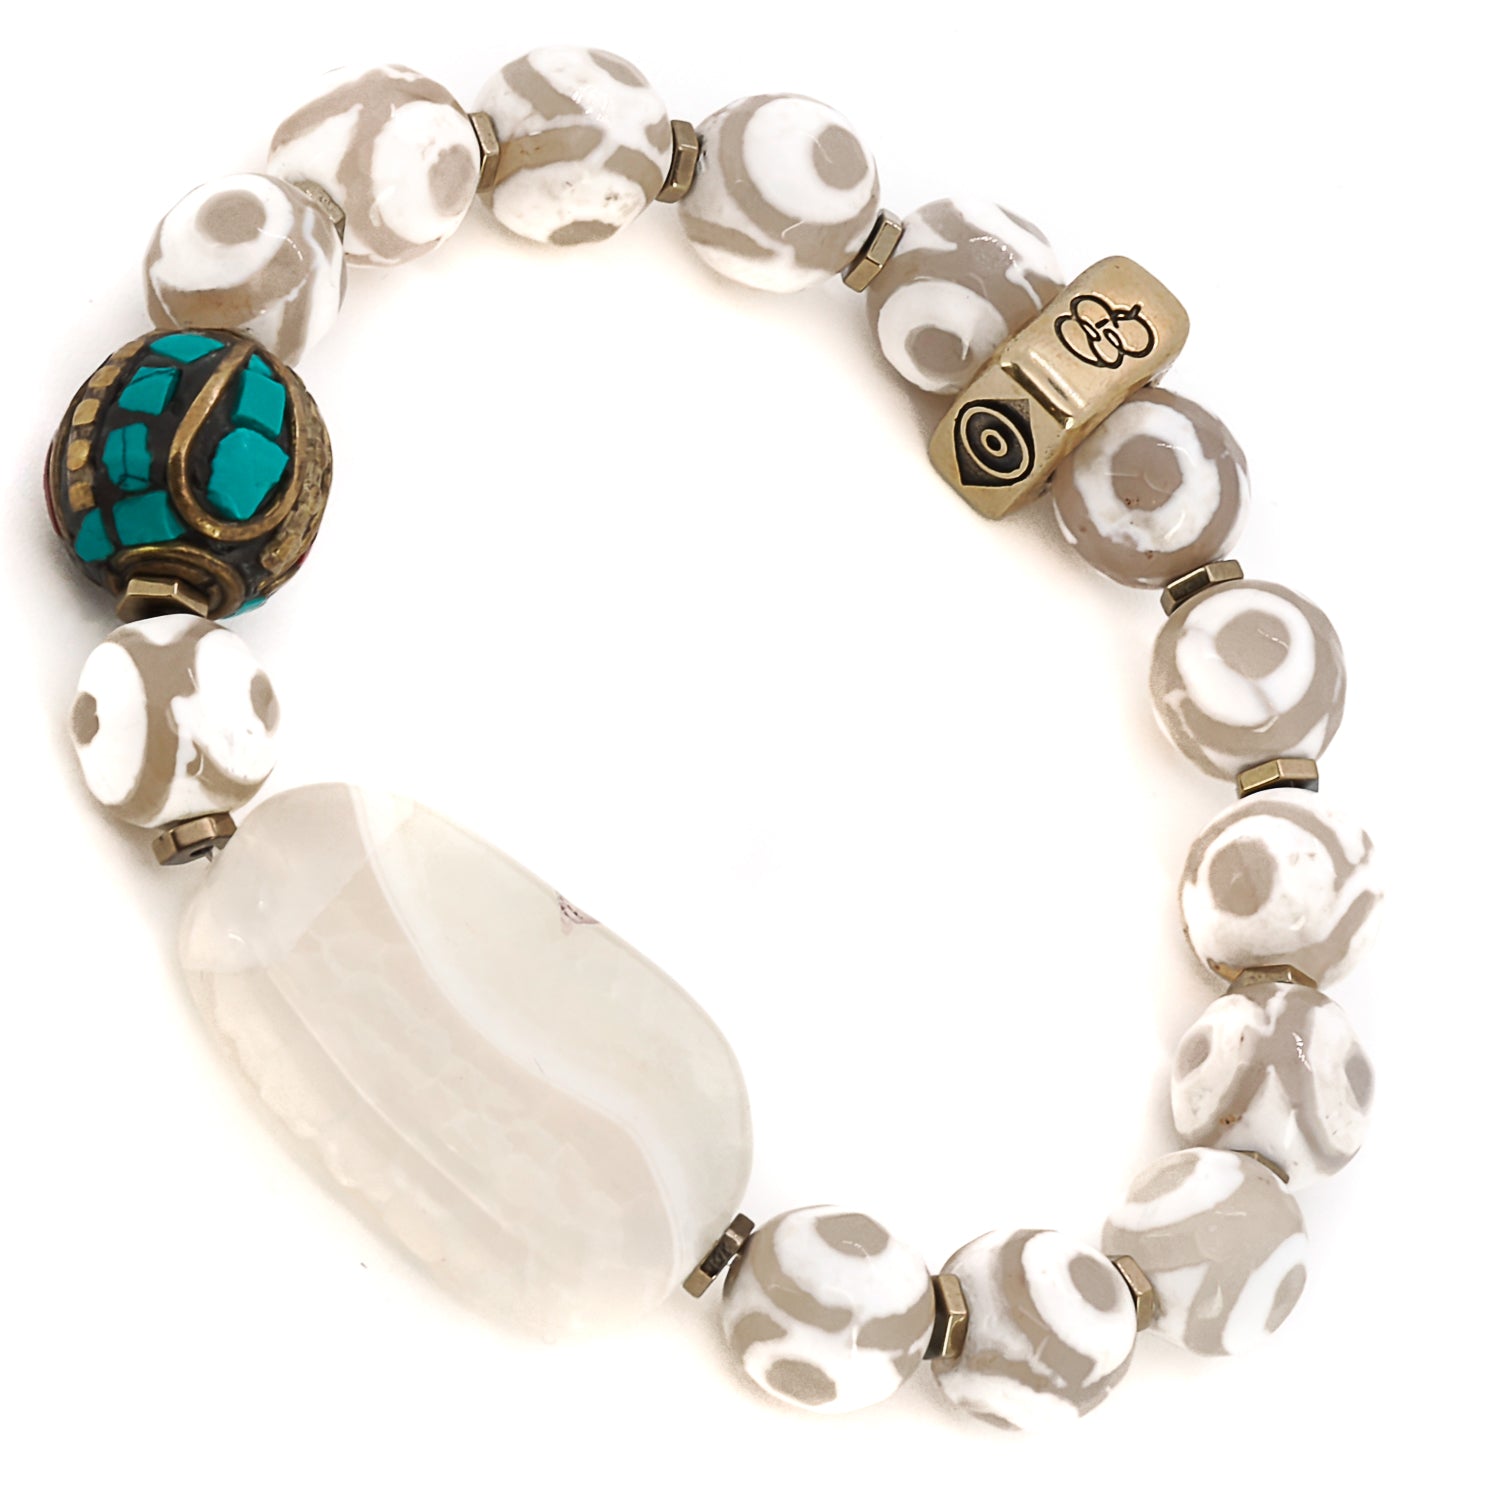 Unique Eye of Nepal Bracelet - Handcrafted accessory with healing white Nepal agate, vibrant green agate, and meaningful bronze symbol beads